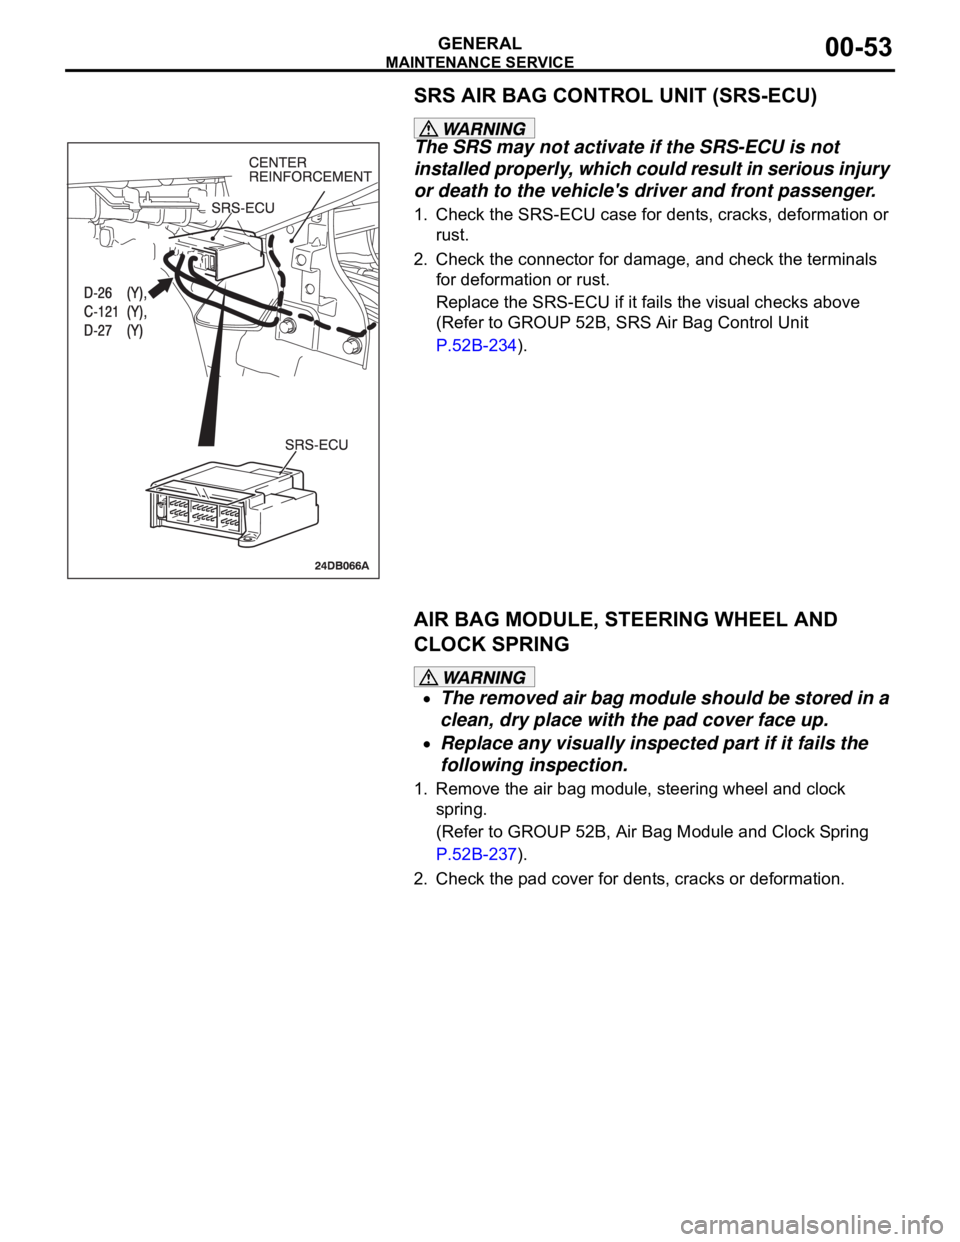 MITSUBISHI 380 2005  Workshop Manual MAINTENANCE SERVICE
GENERAL00-53
SRS AIR BAG CONTROL UNIT (SRS-ECU) 
The SRS may not activate if the SRS-ECU is not 
installed properly, which could result in serious injury 
or death to the vehicles